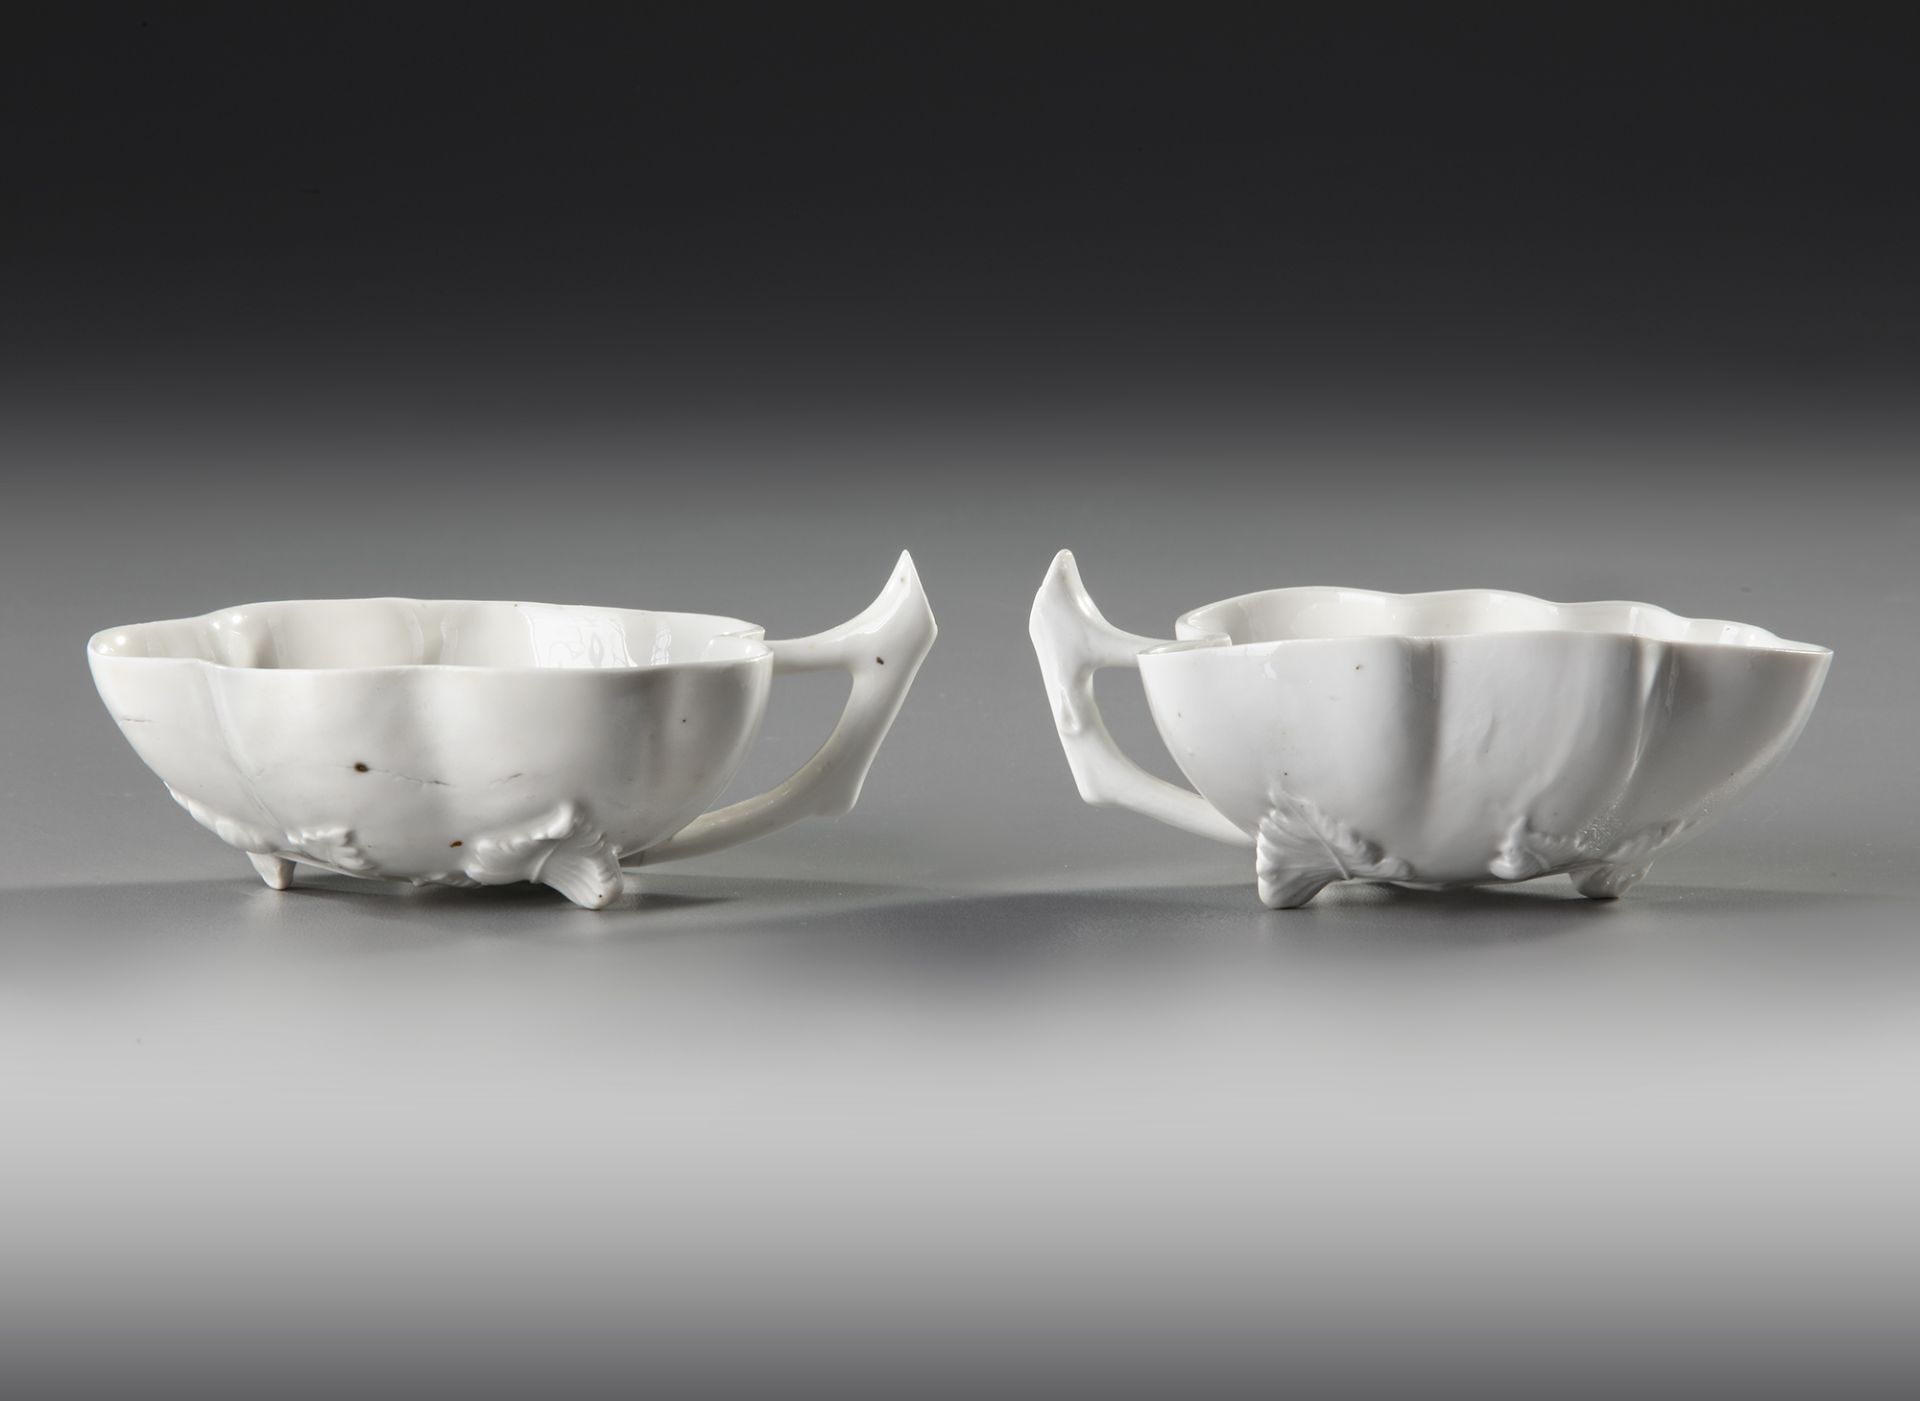 TWO CHINESE 'BLANC DE CHINE' LEAF-SHAPED CUPS, 17TH-18TH CENTURY